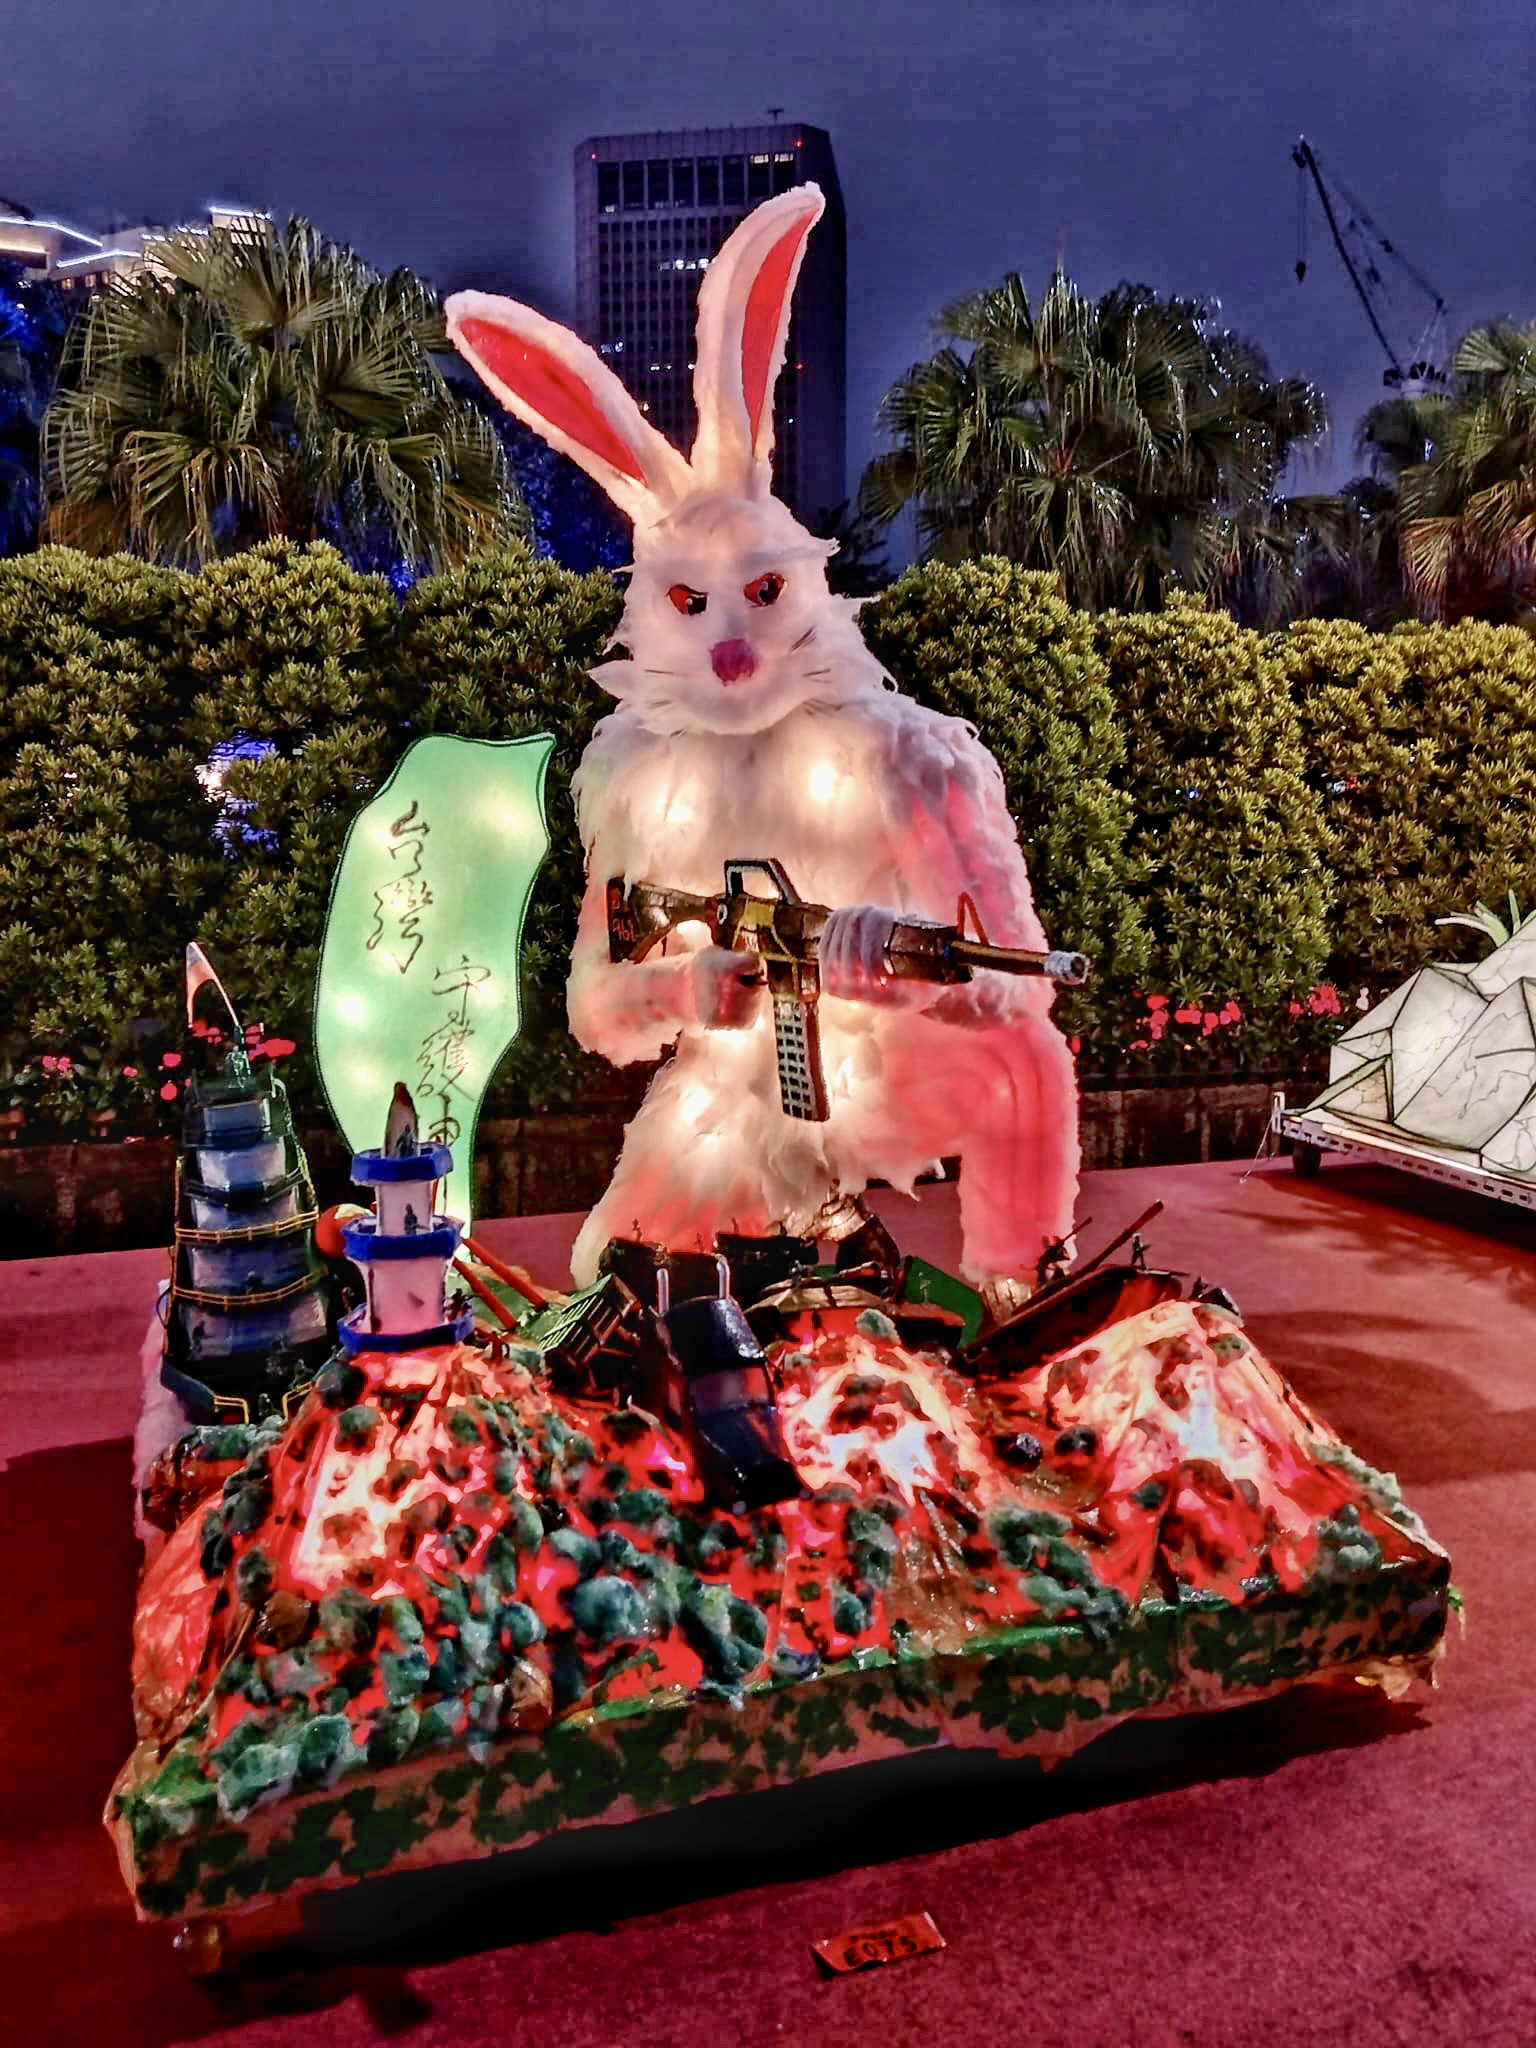 A macho killer rabbit lantern has been spotted at the lantern festival in taipei